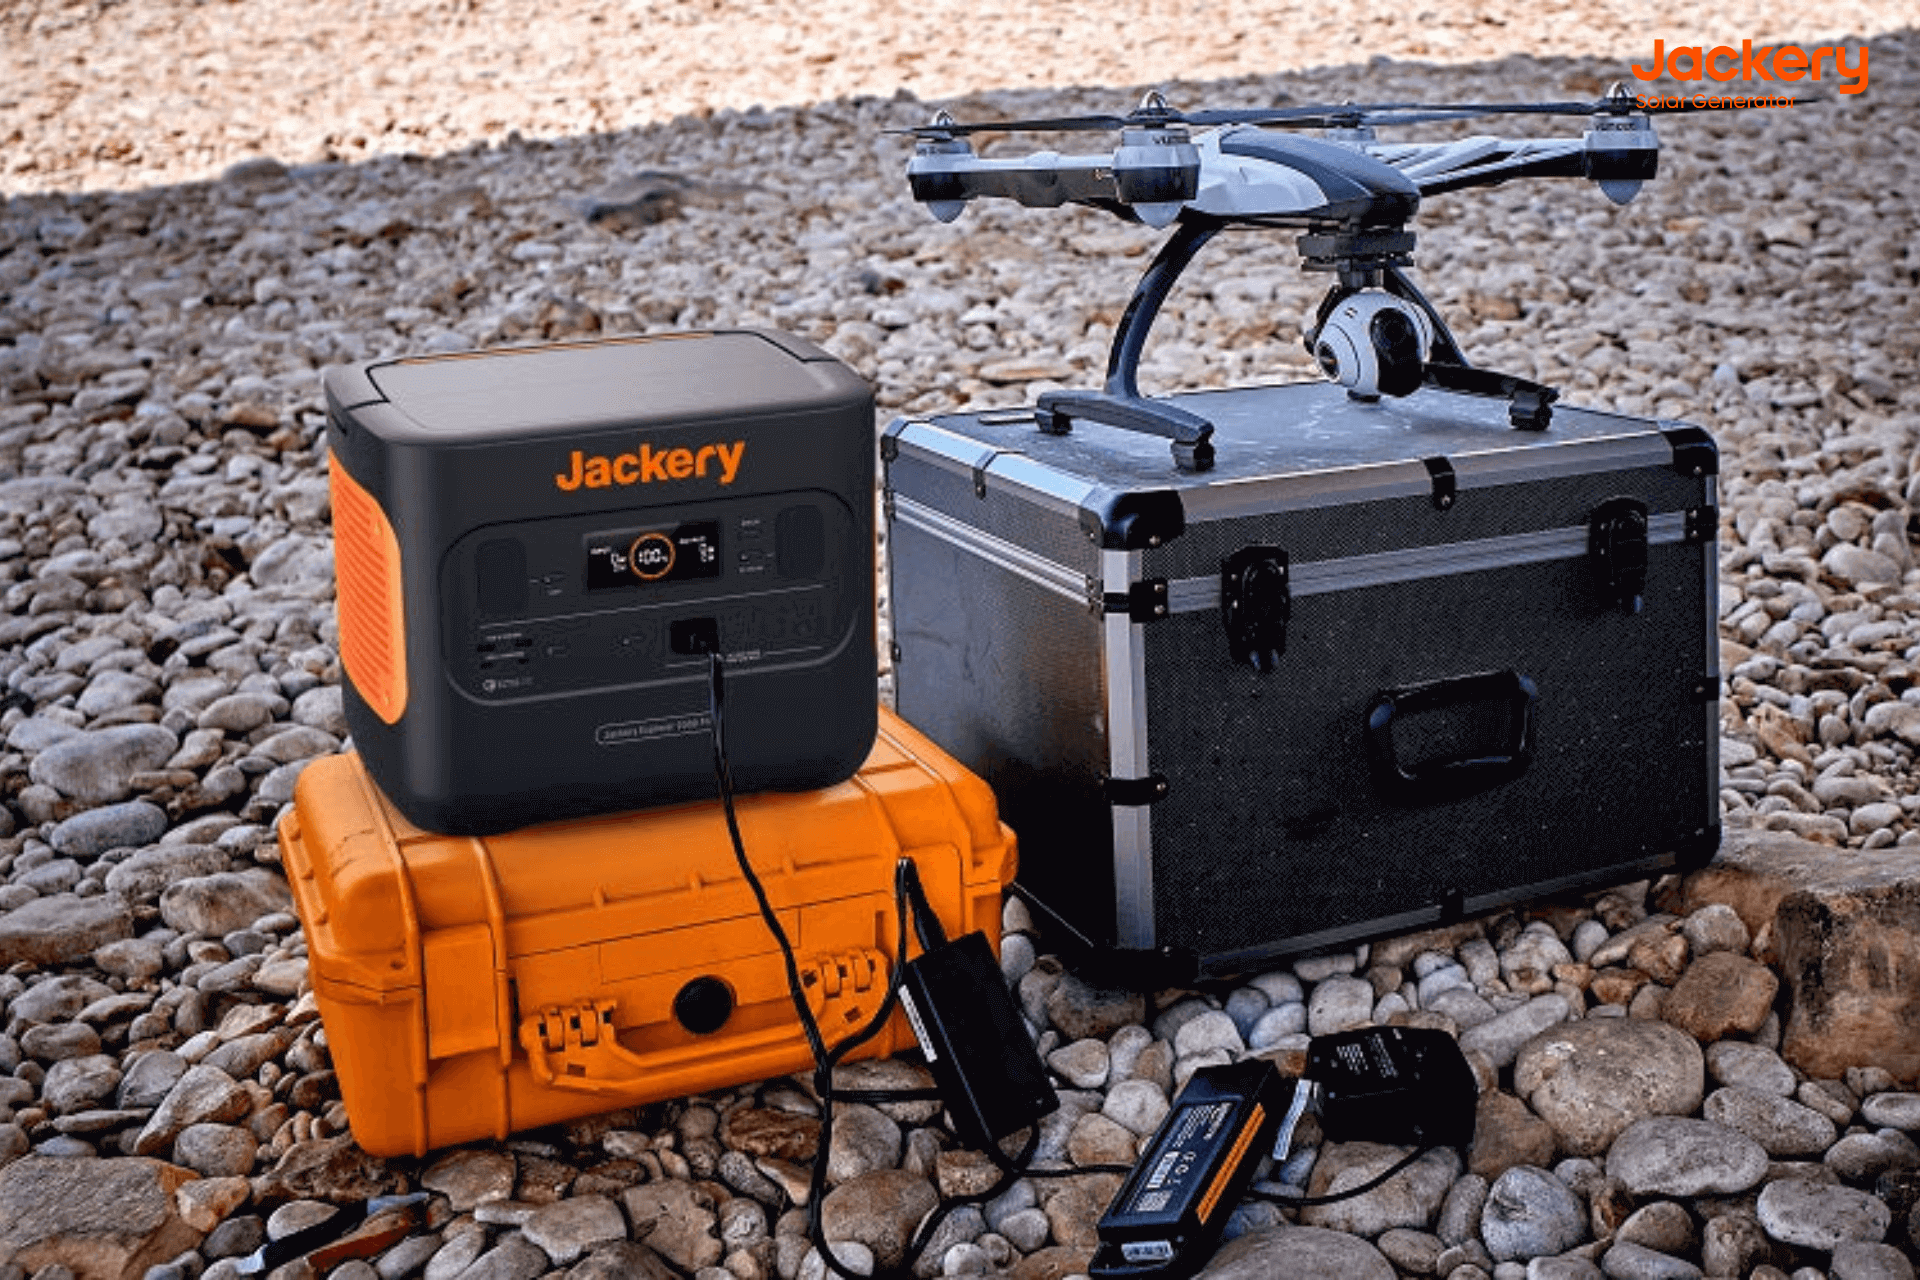 Jackery portable power station with pure sine wave inverter